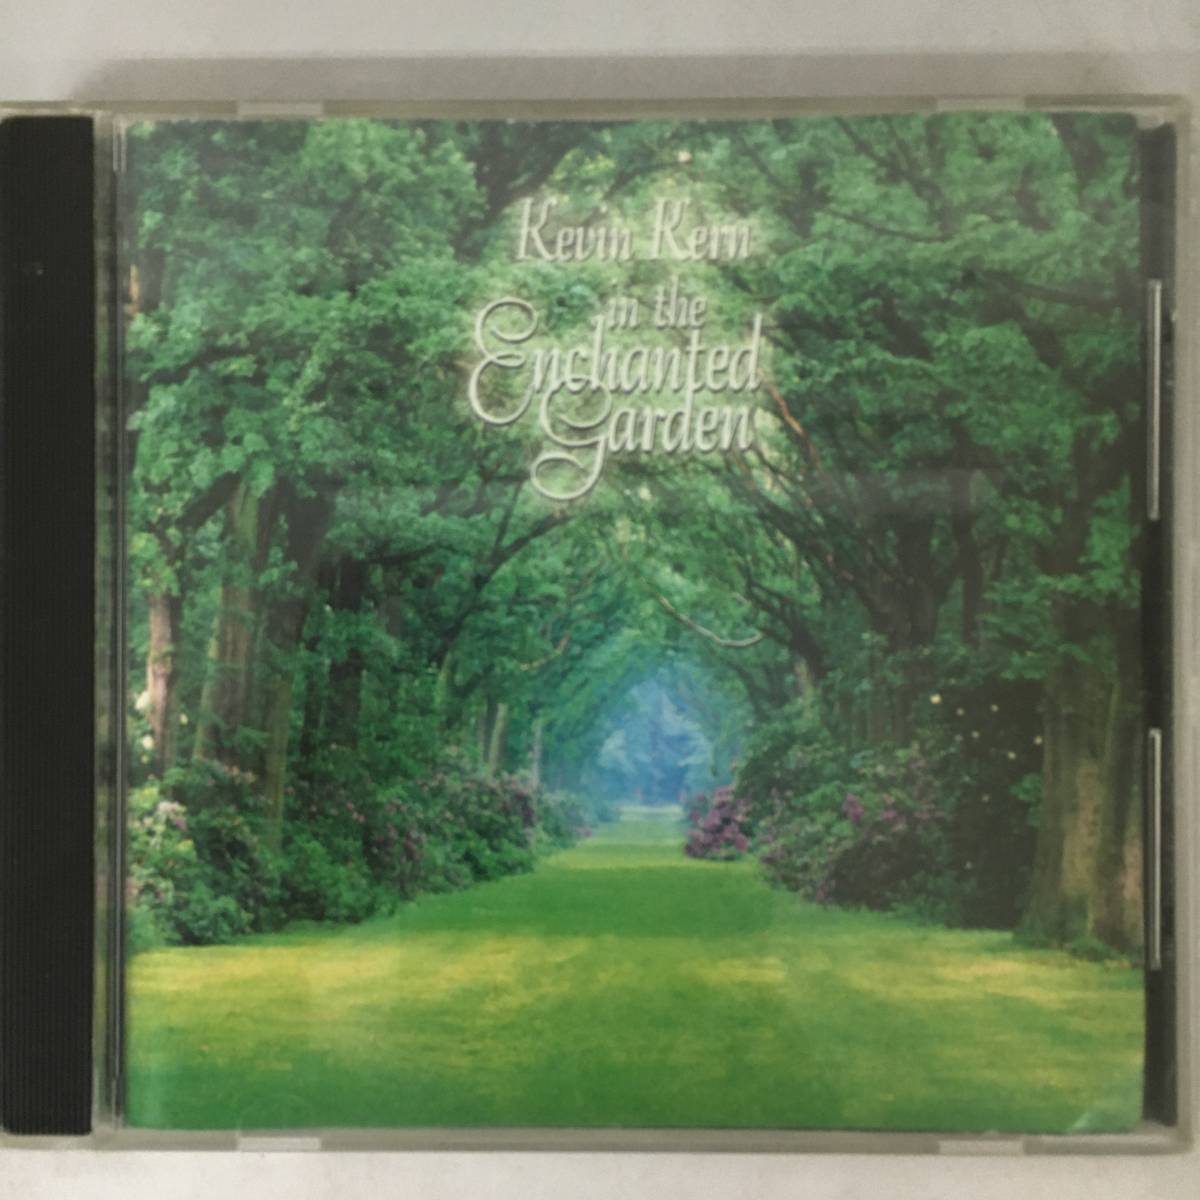 BT2/62 Kevin Kern / in the Enchanted Garden CD REAL MUSIC ヒーリング ピアノ ケビン・カーン■の画像1